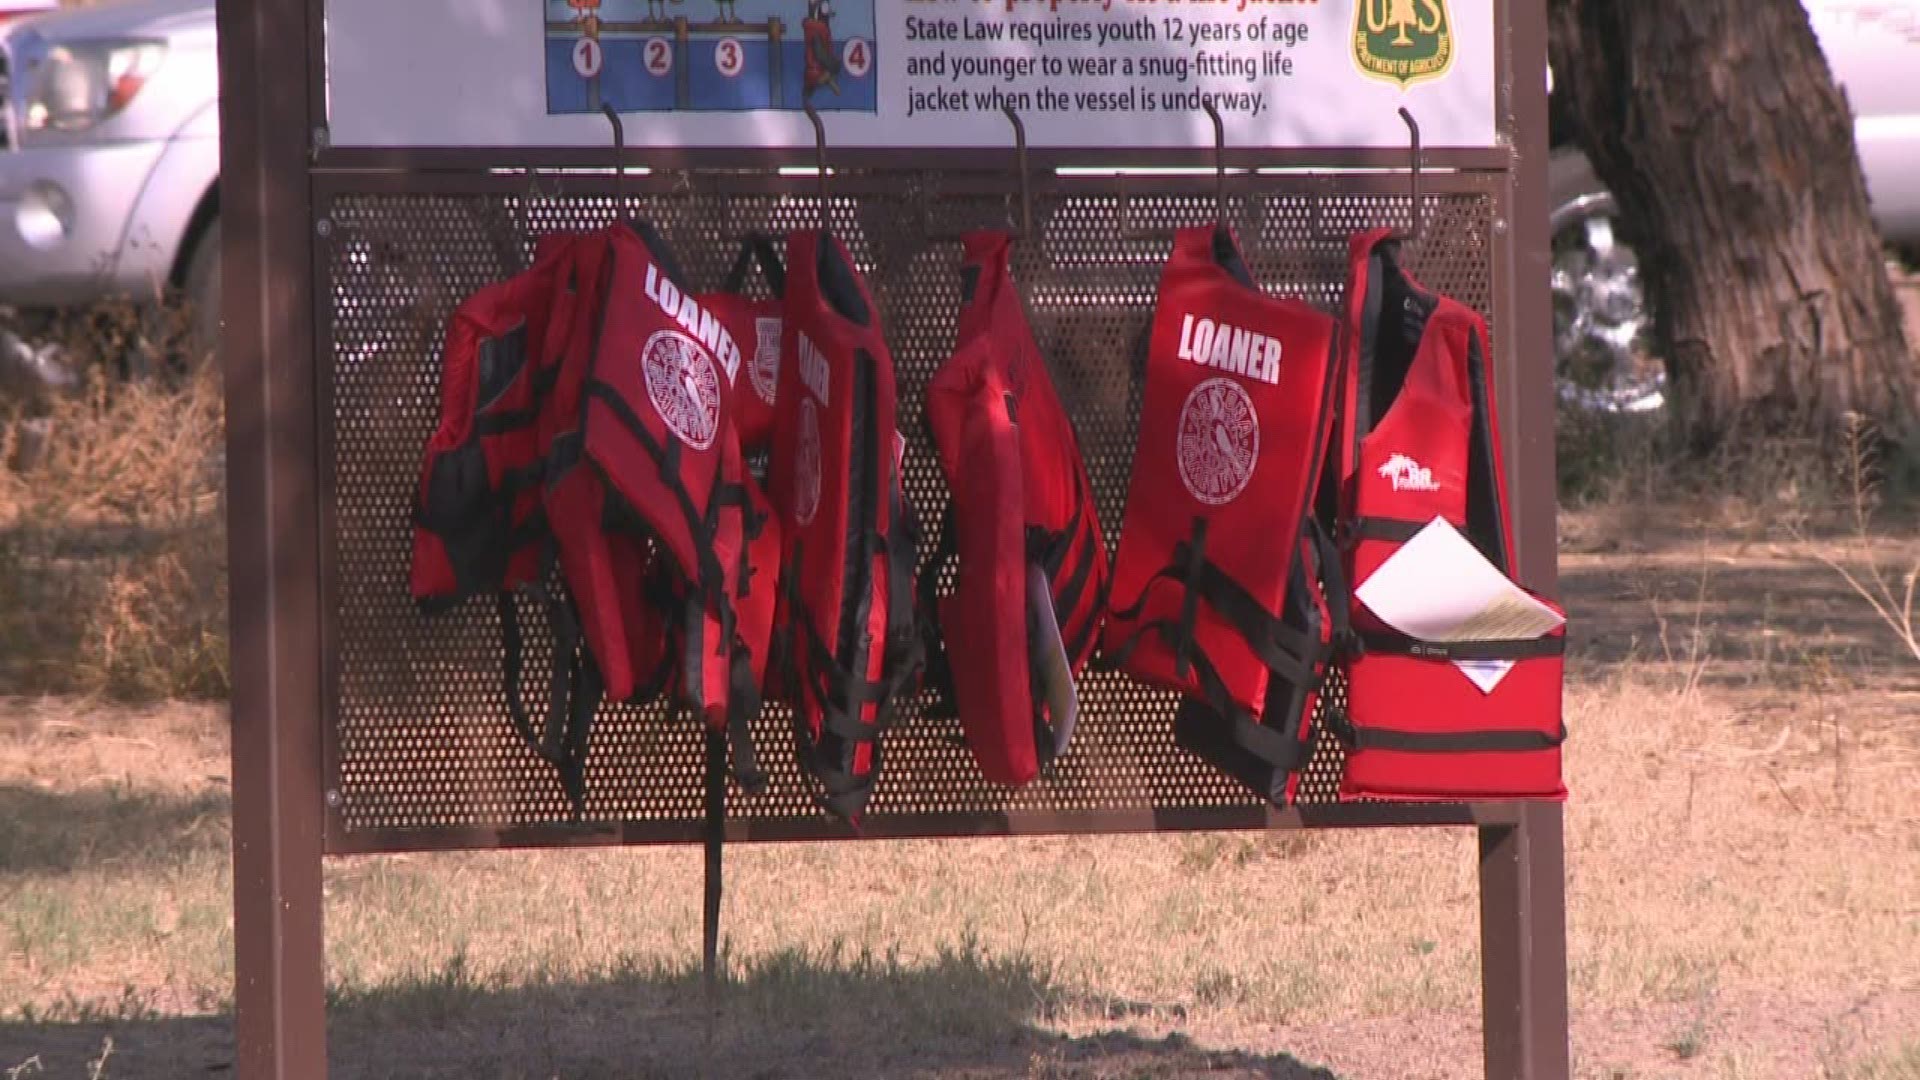 The Ryan Thomas Foundation works to preventing future drowning tragedies.